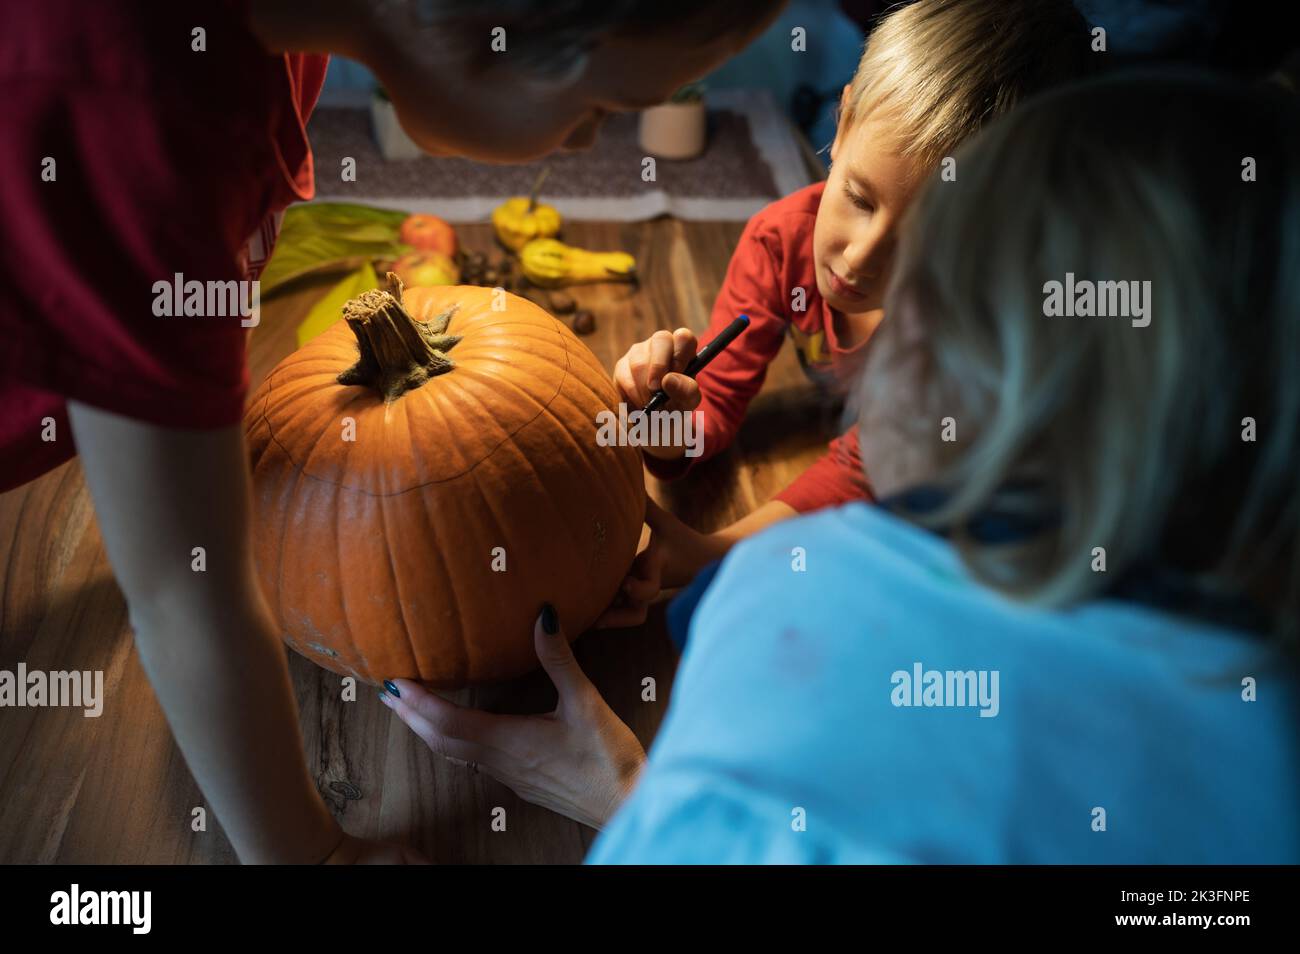 Three children, siblings, drawing on a pumpkin they will carve for halloween holiday season. Stock Photo